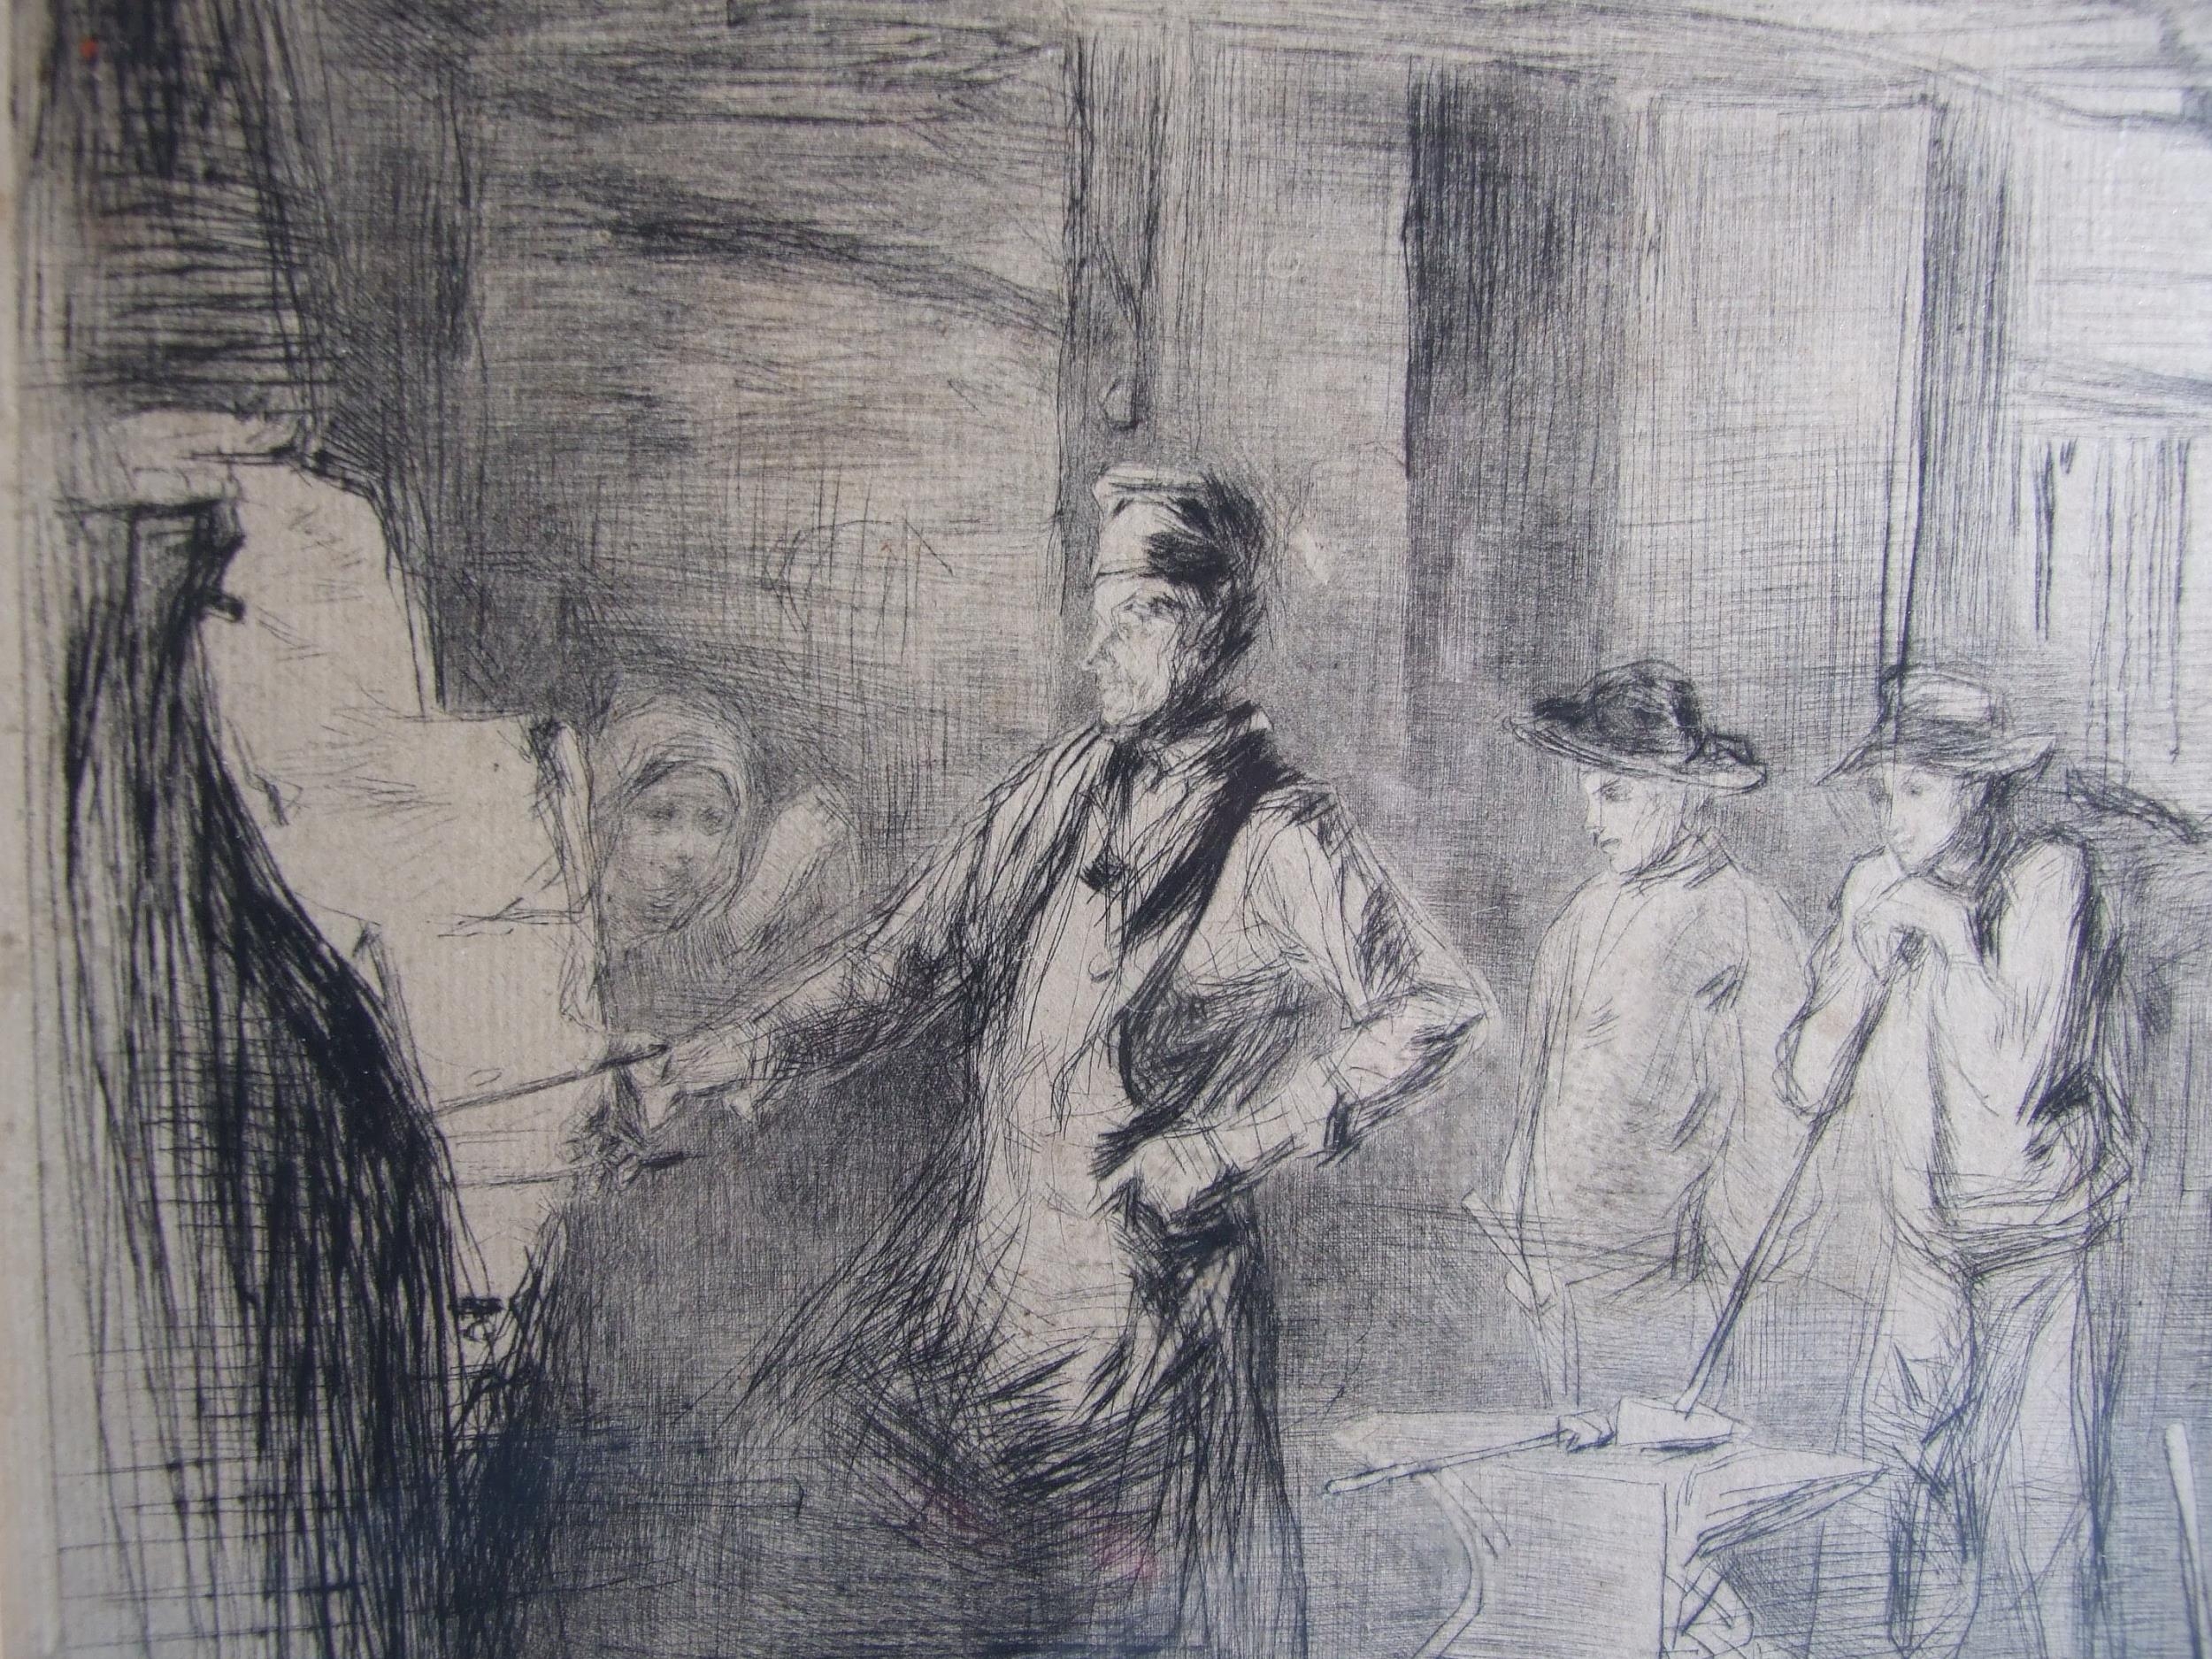 After James Abbott McNeill Whistler RBA (1834-1903), "The Forge", etching, 20 x 32.5cm. - Image 4 of 5